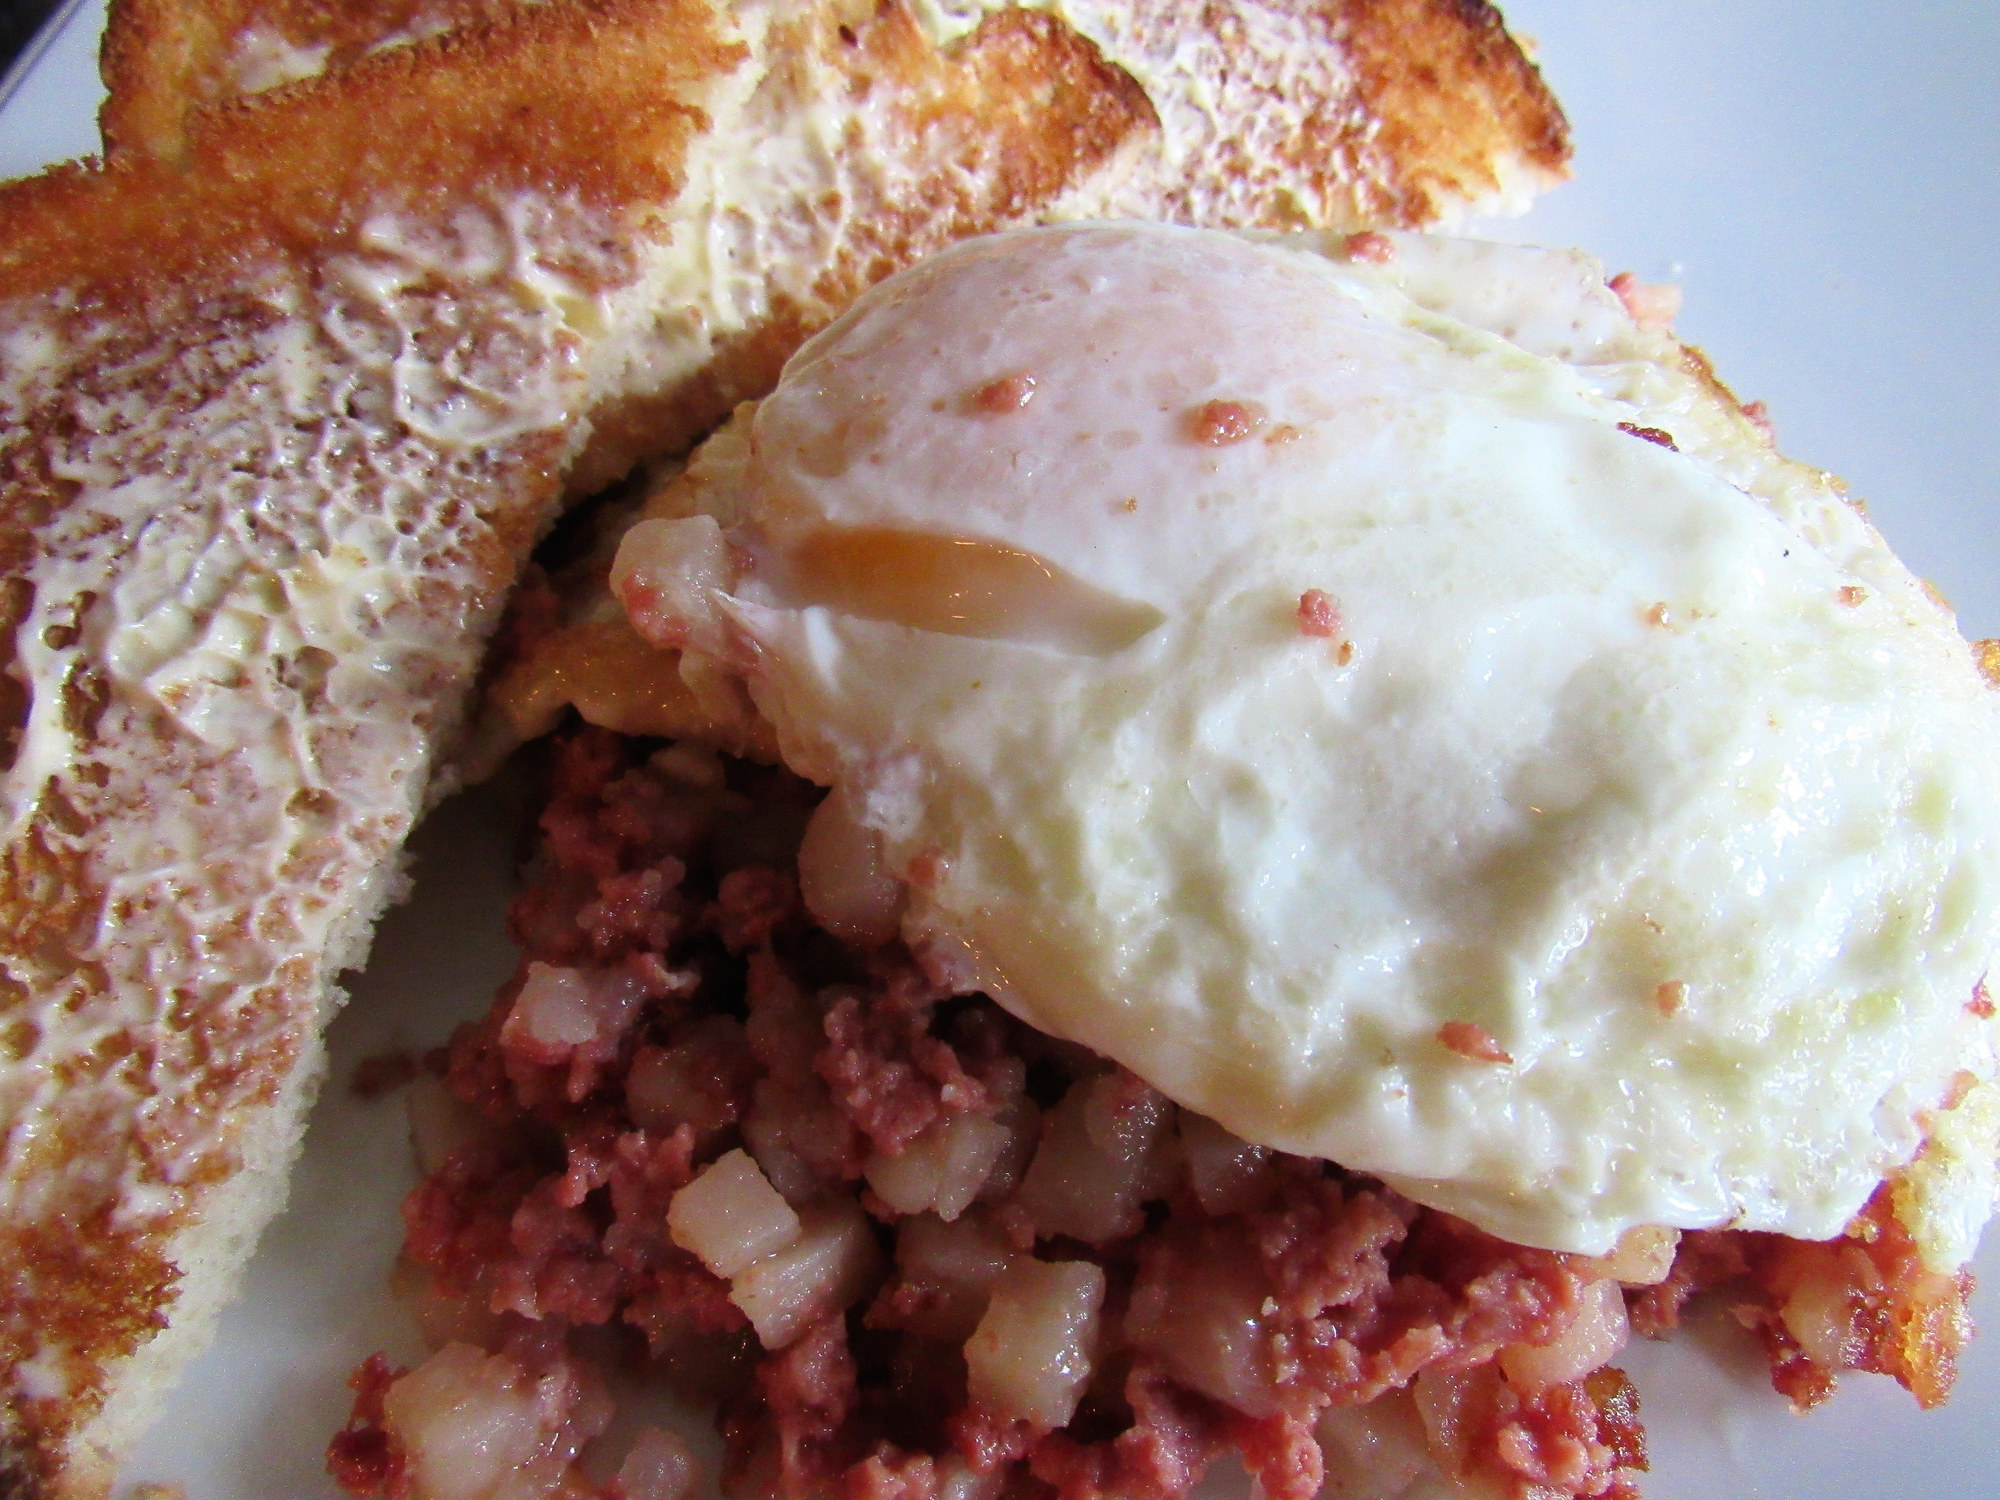 Corned beef hash with poached egg and toast